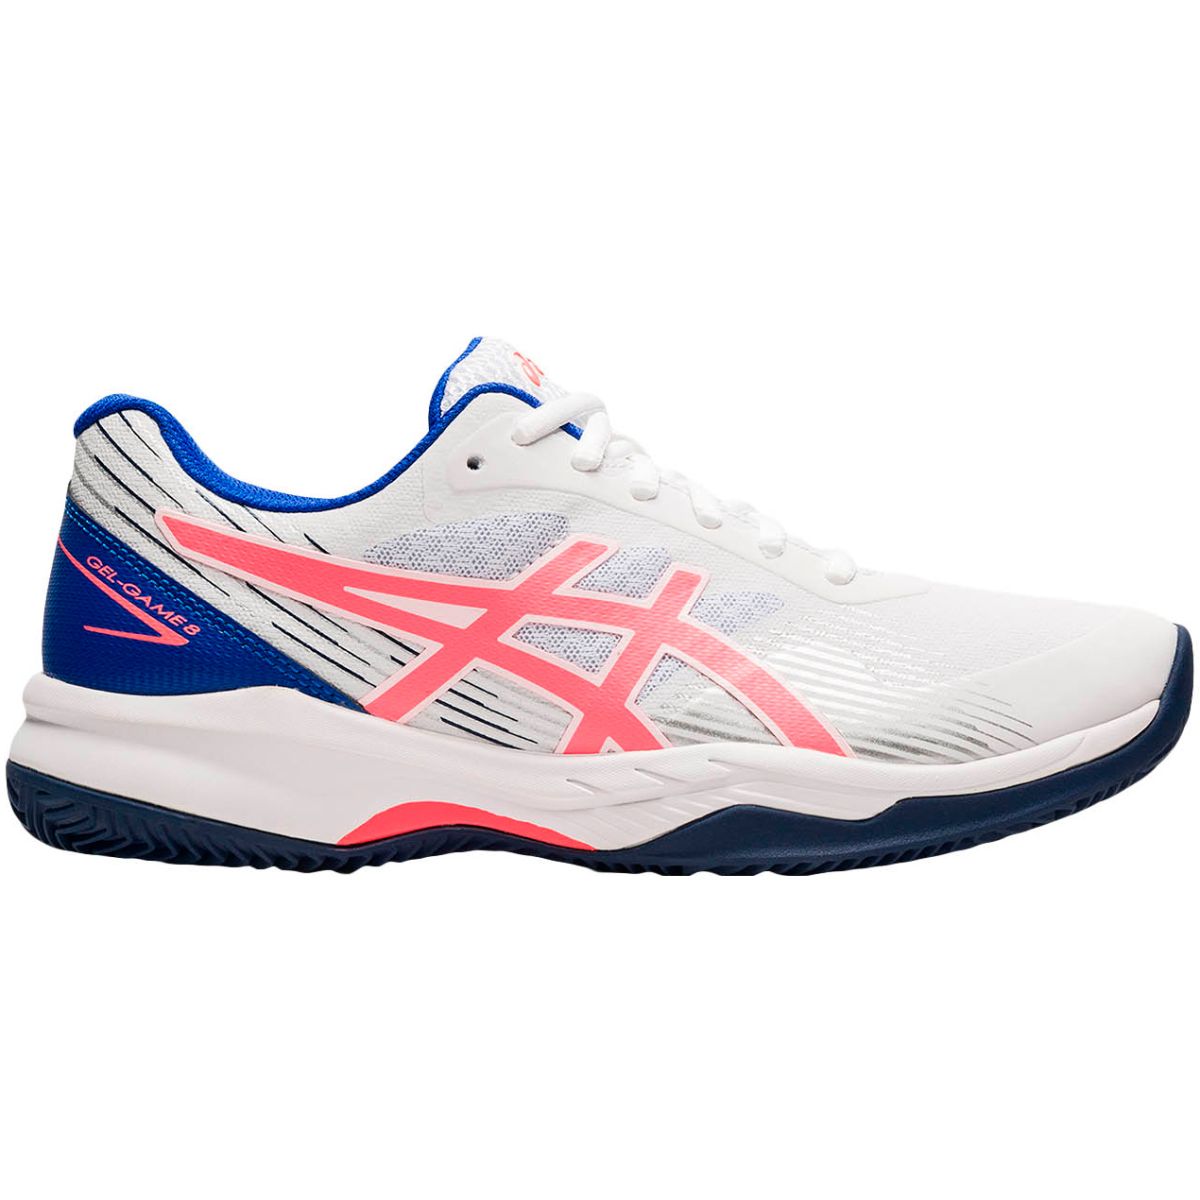 Asics Gel-Game 8 Women's Clay Tennis Shoes 1042A151-102